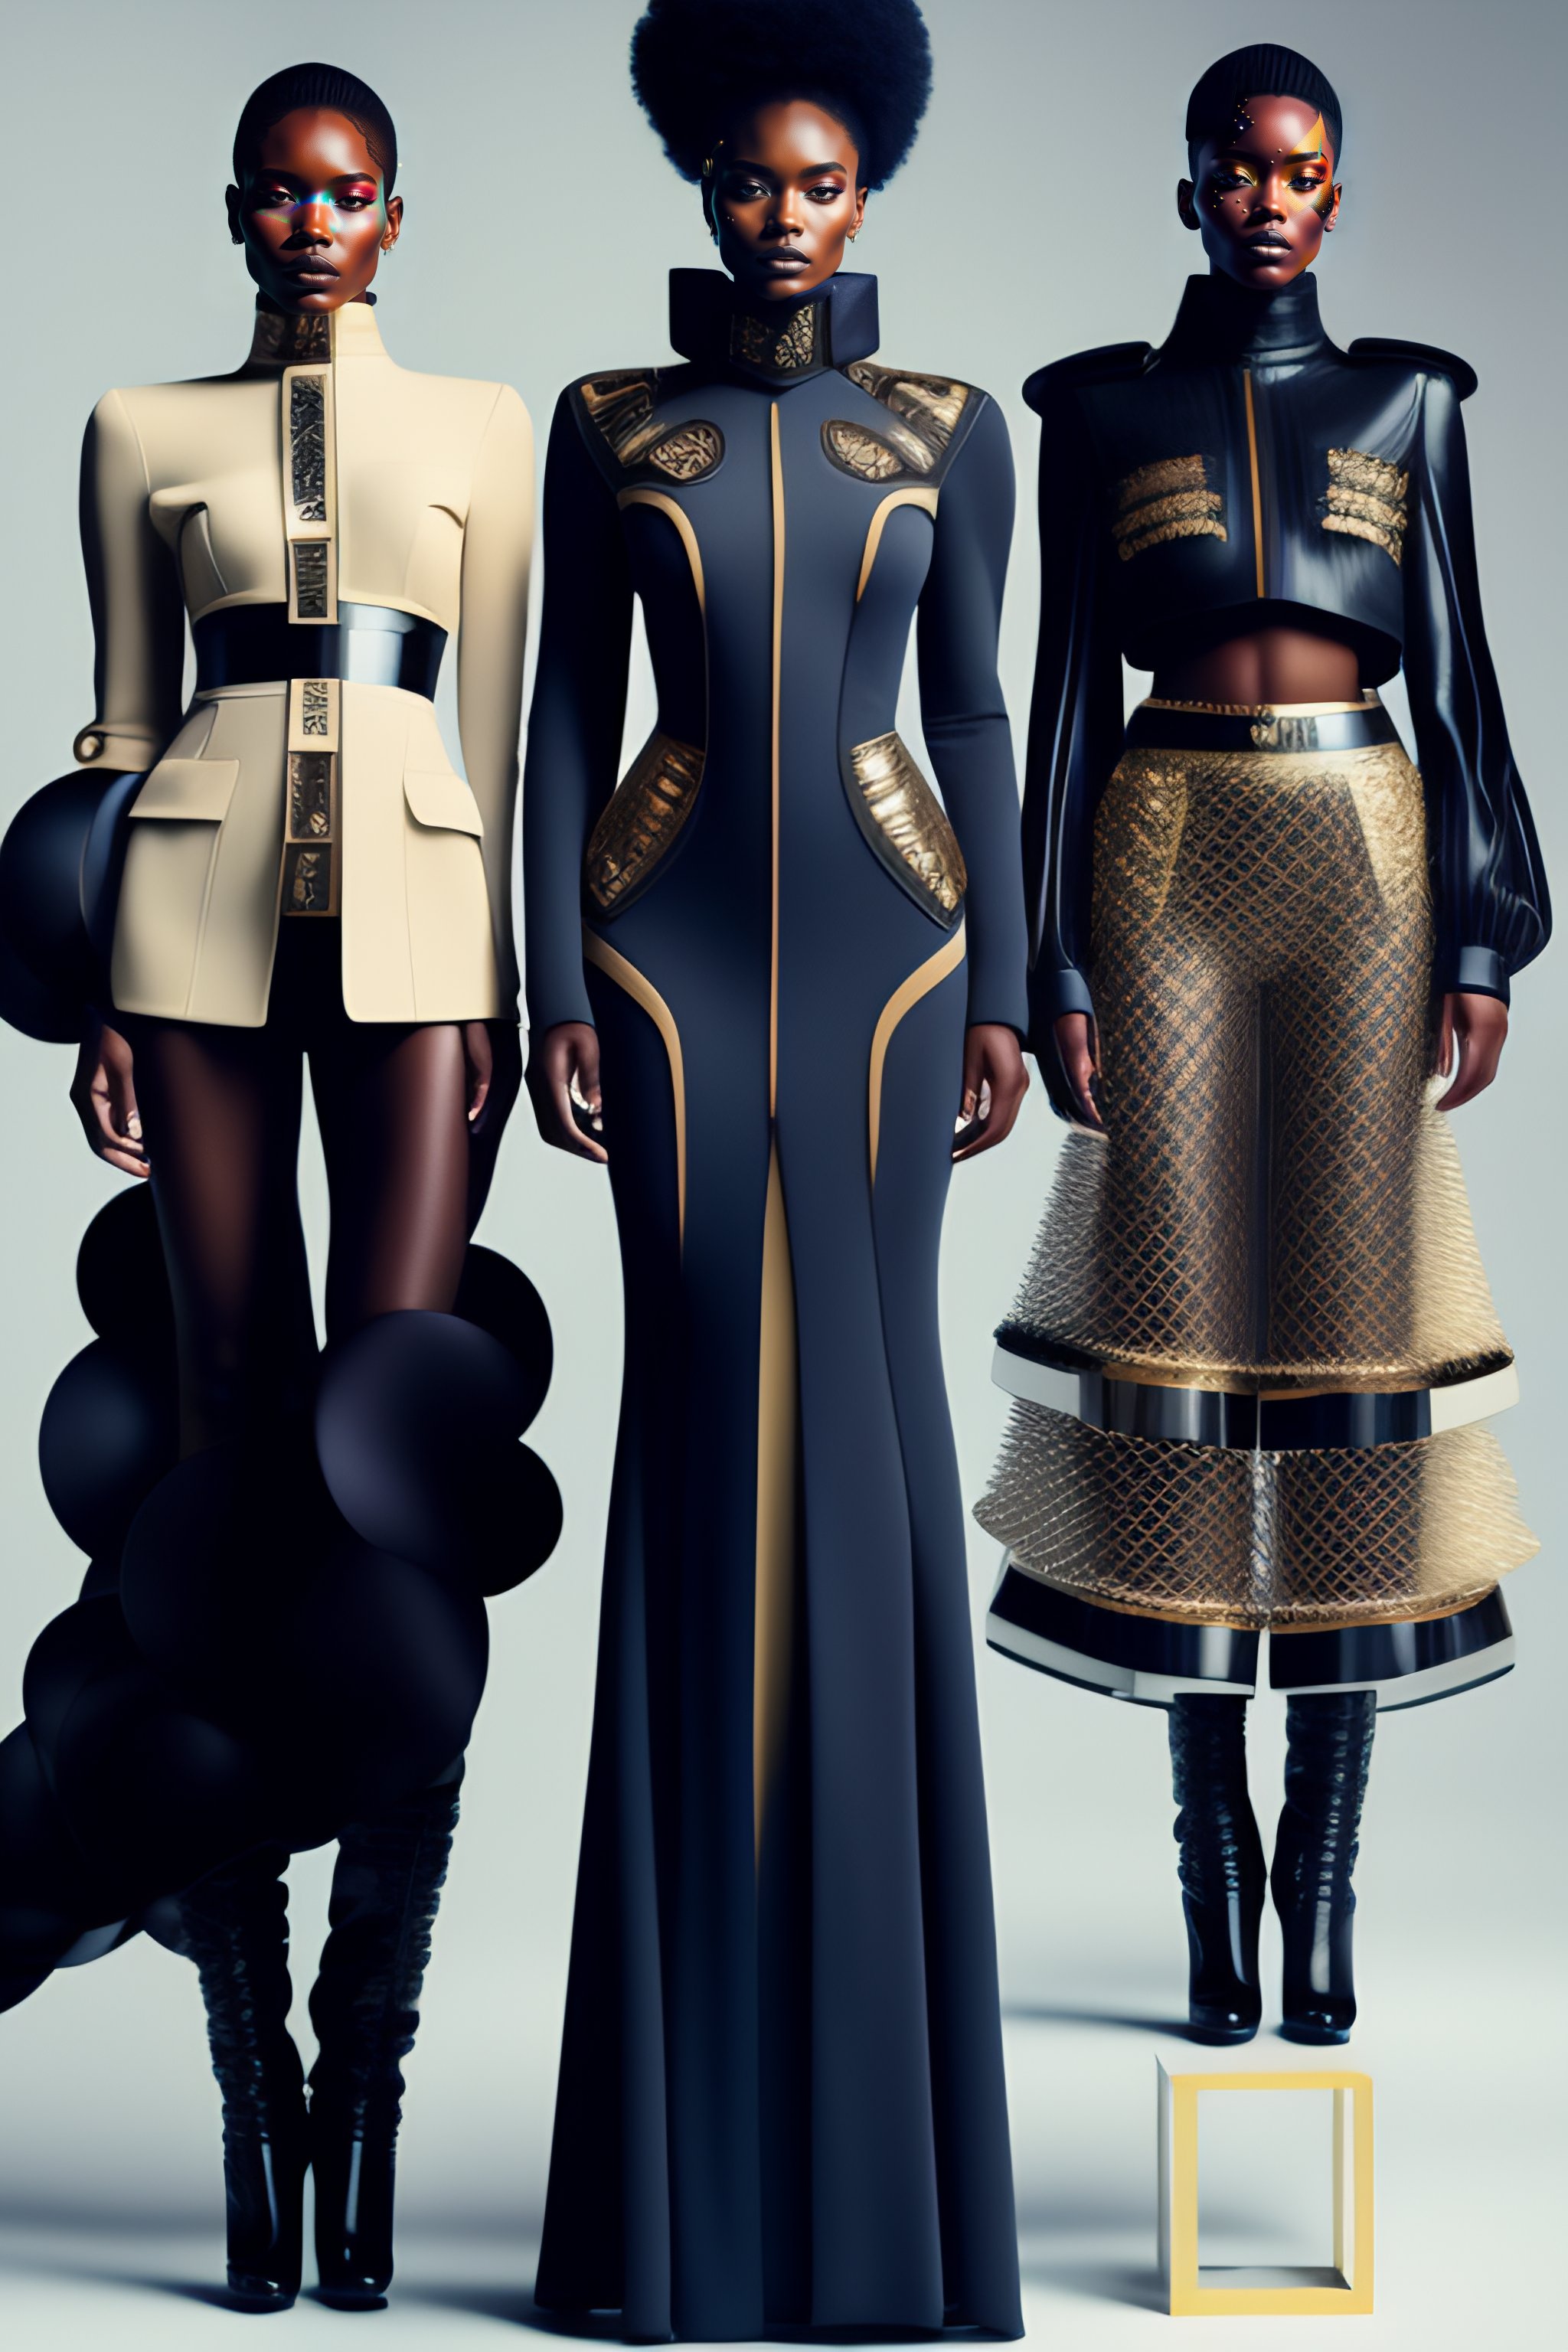 Lexica - Trending fashion garments from the year 3000, knolling ...